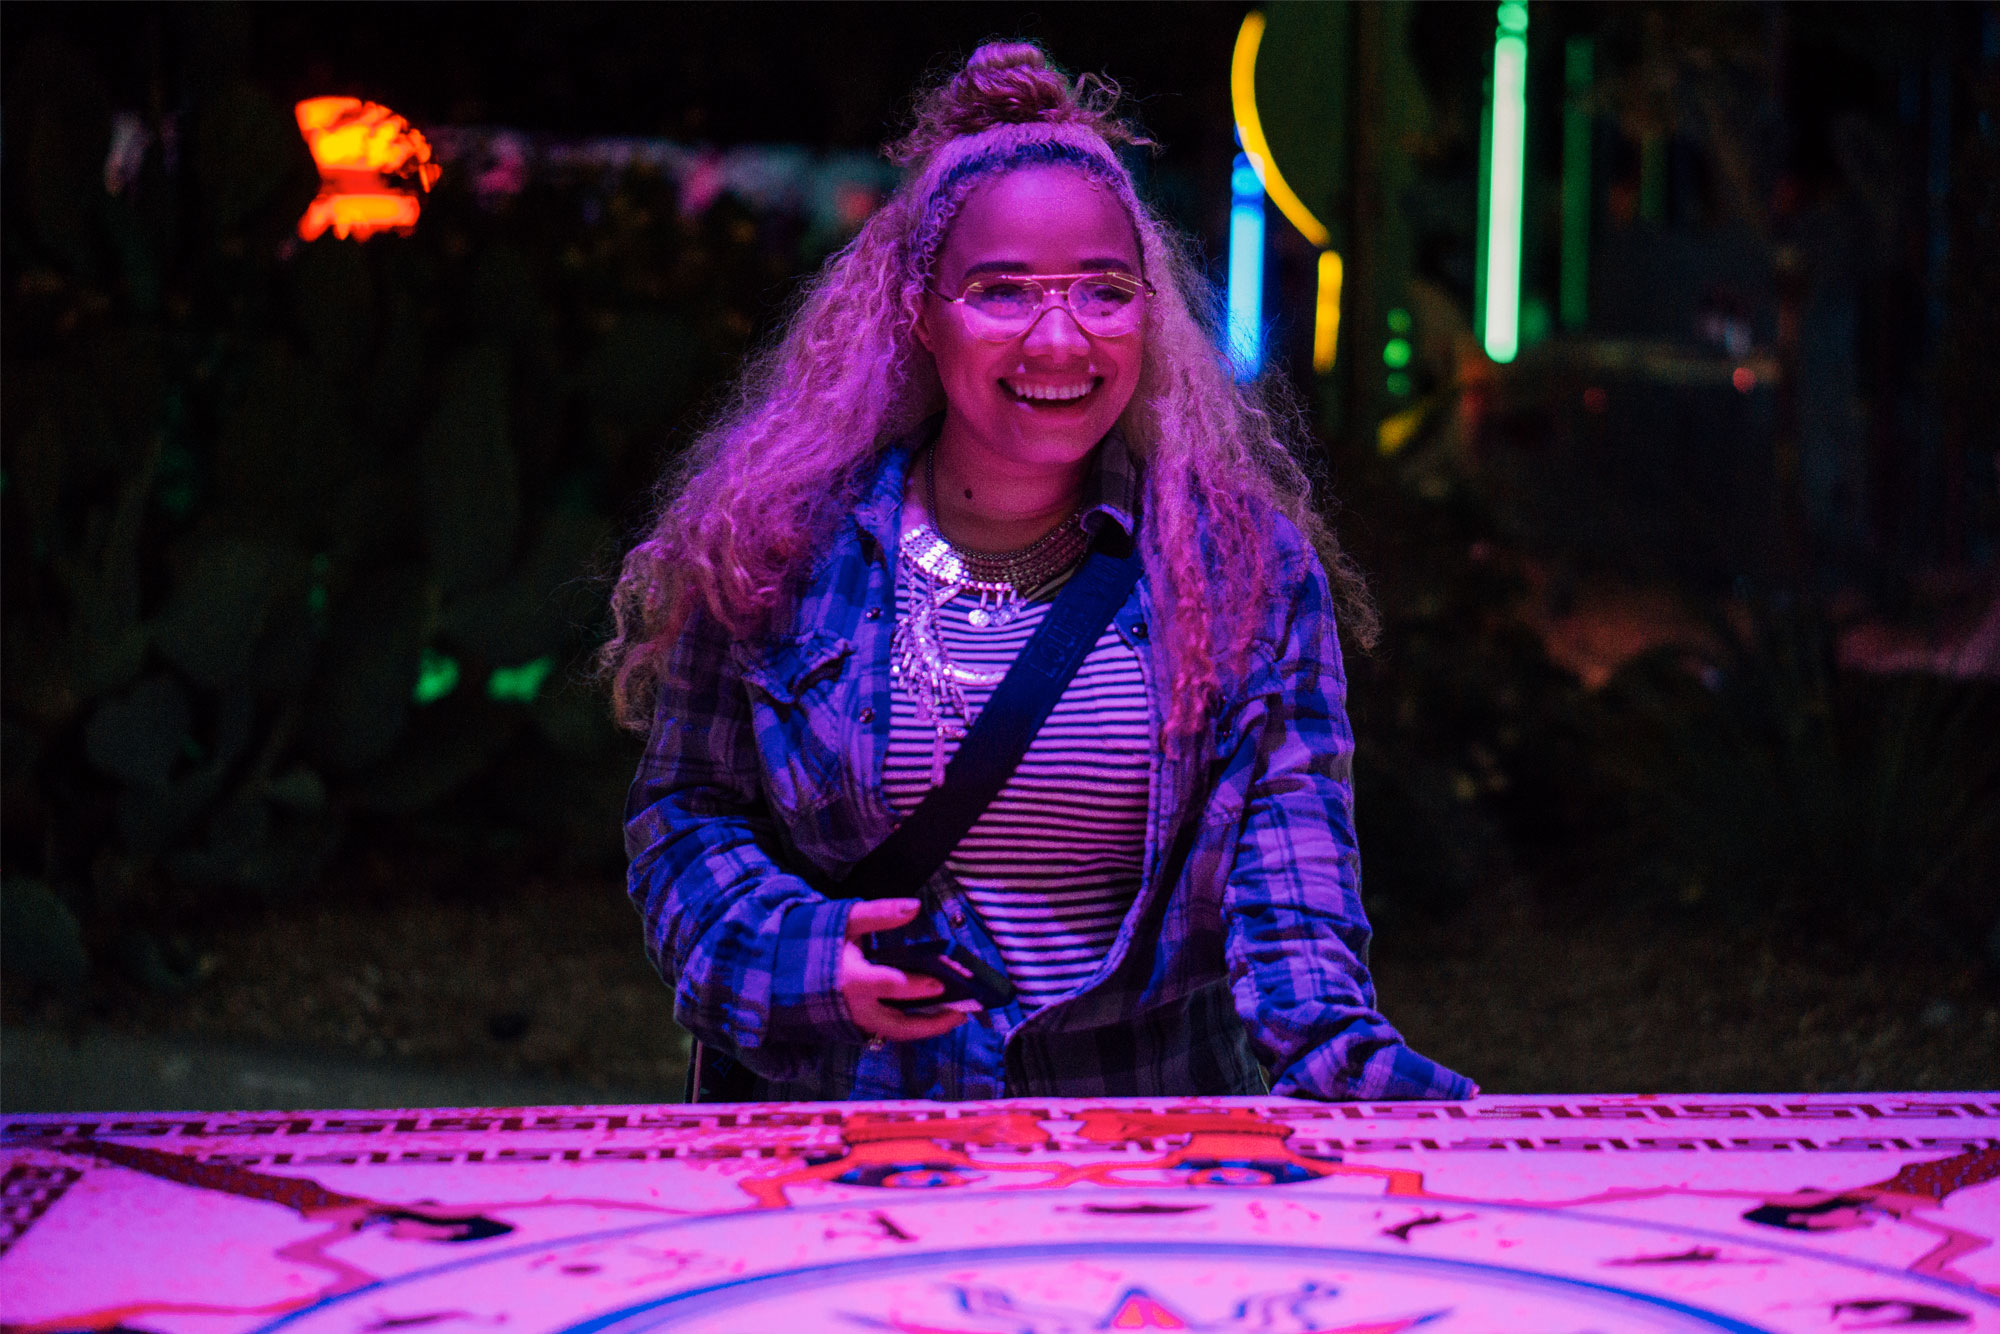 Picture of a person enjoying the festival.